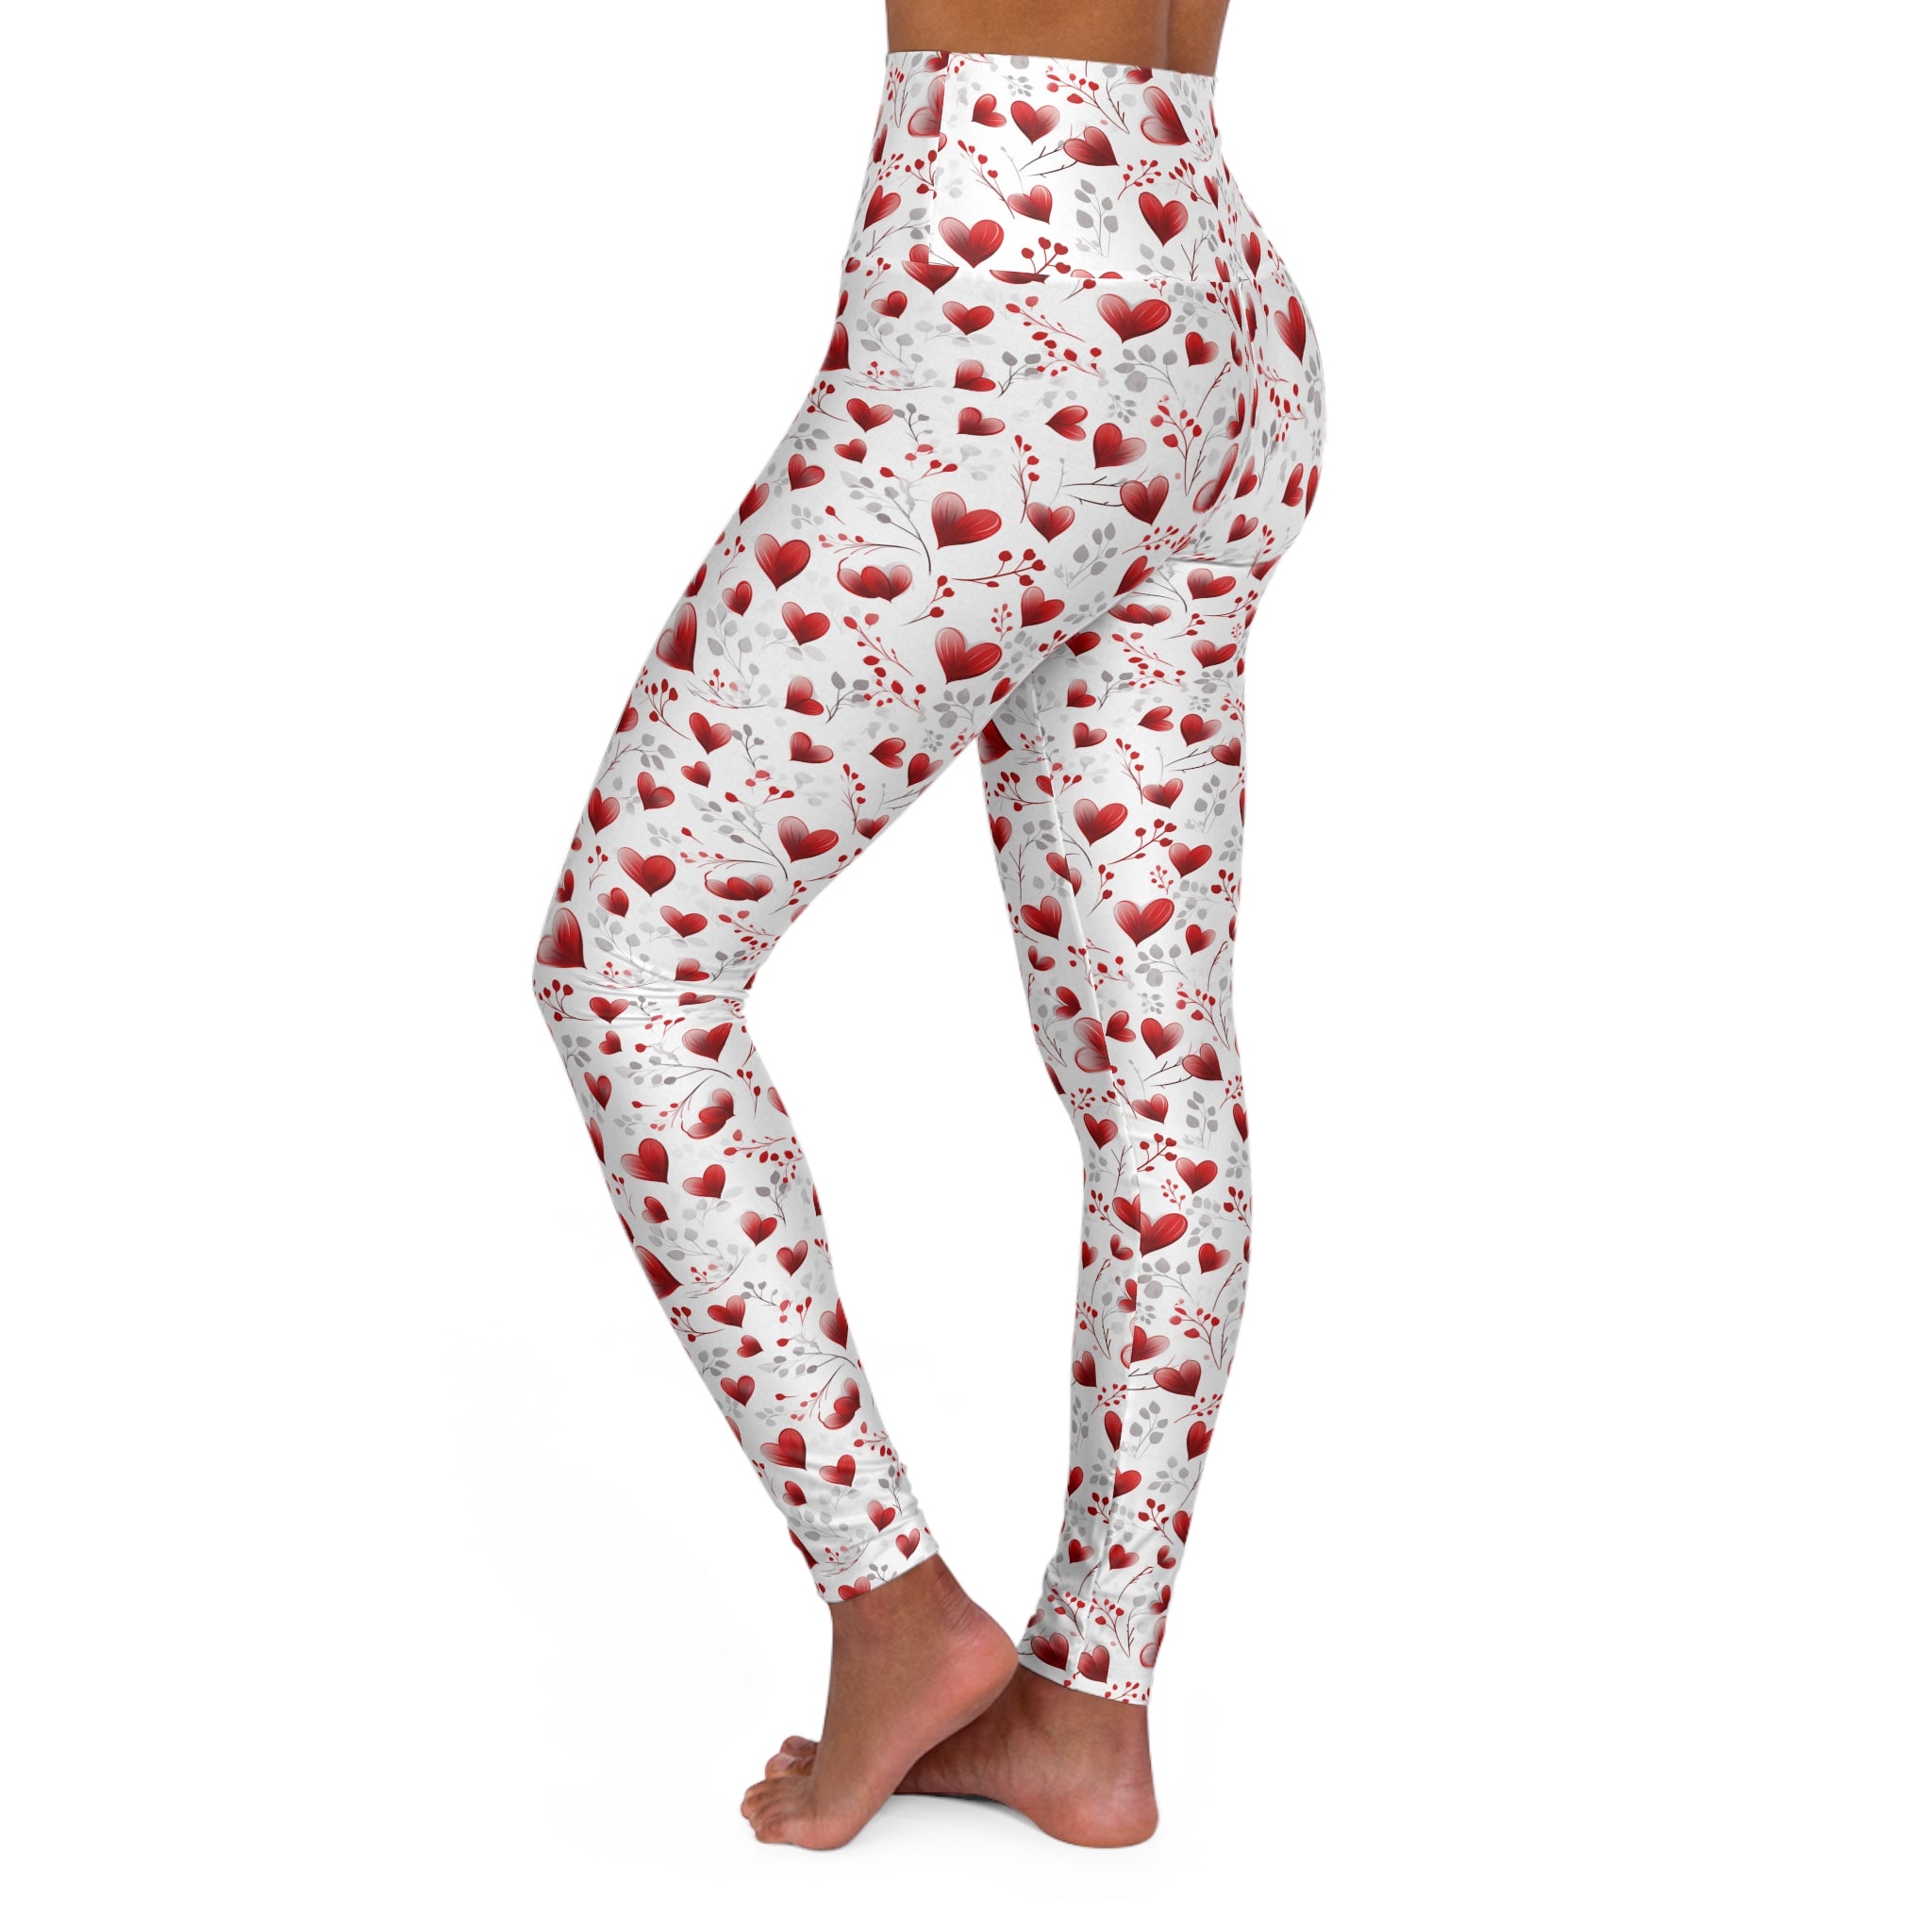 Red Valentine's Day Hearts Gym Leggings for Women S-2XL